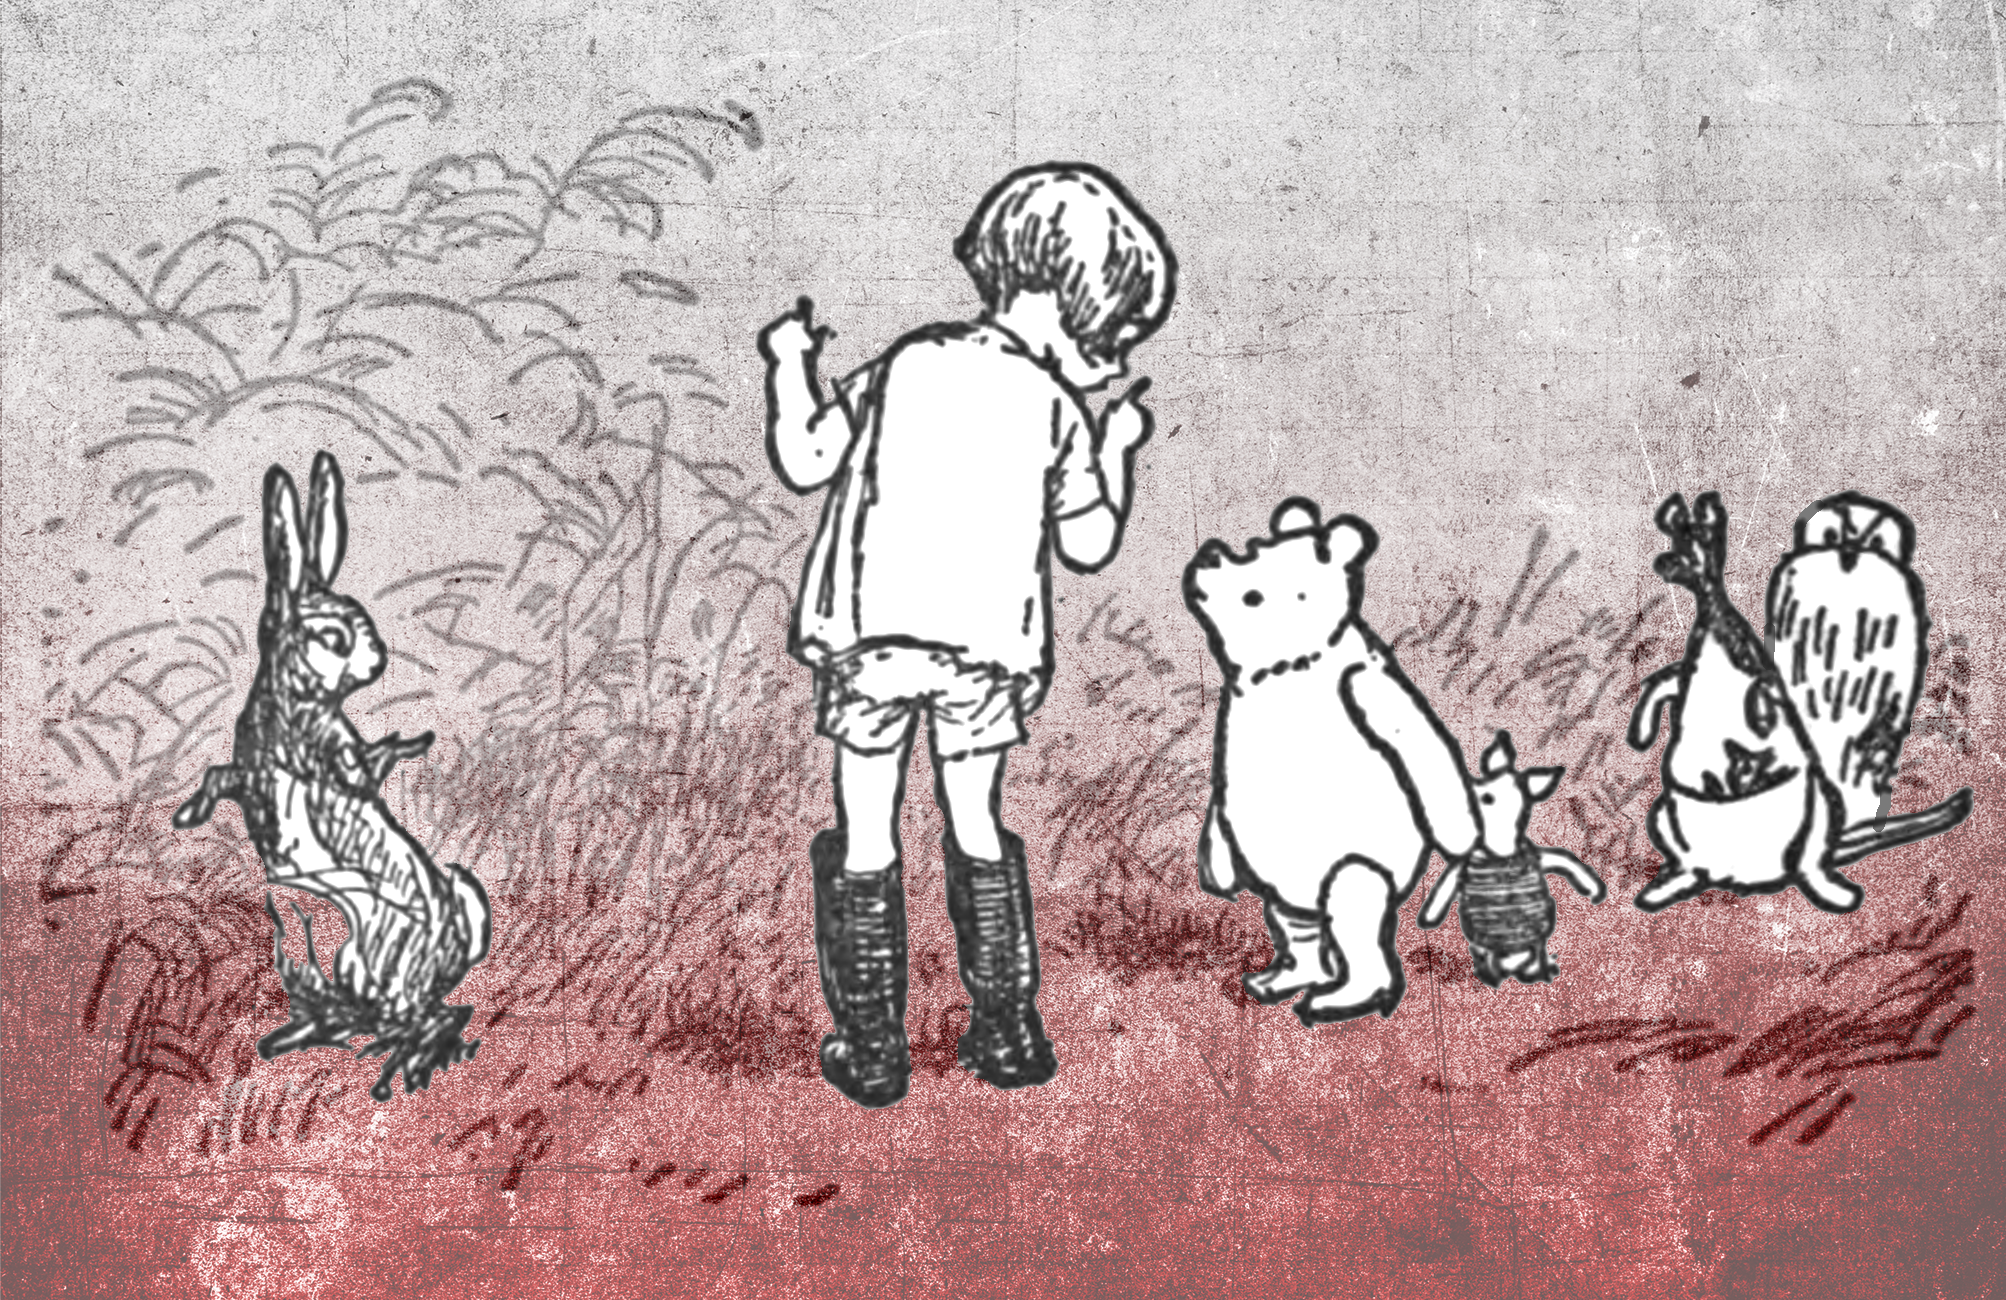 Winnie-the-Pooh, Characters & Facts